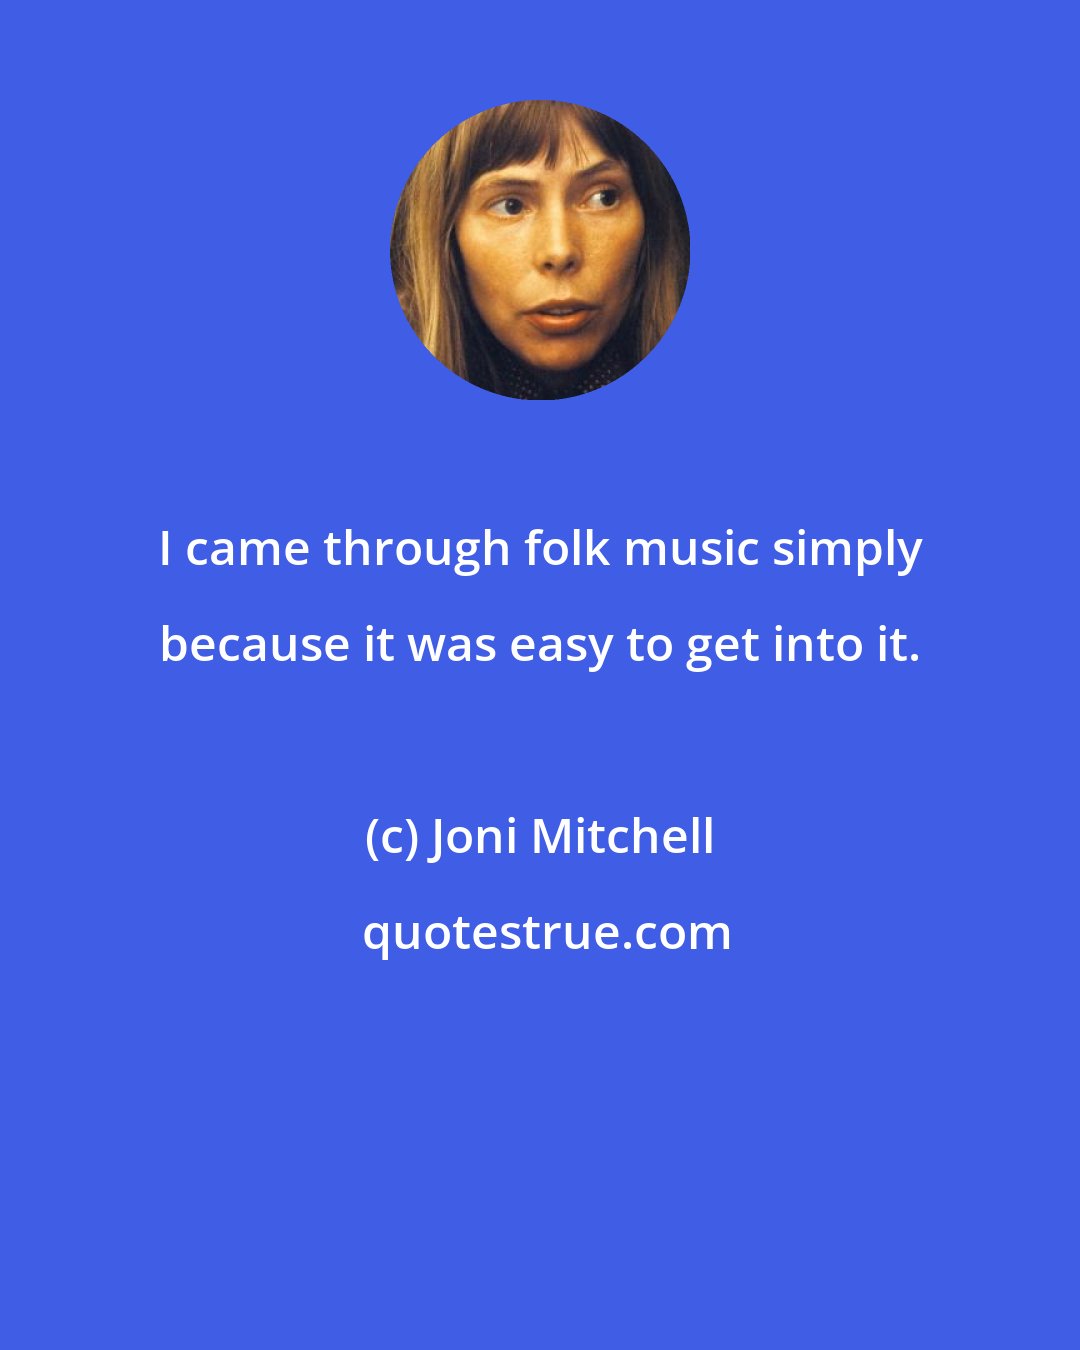 Joni Mitchell: I came through folk music simply because it was easy to get into it.